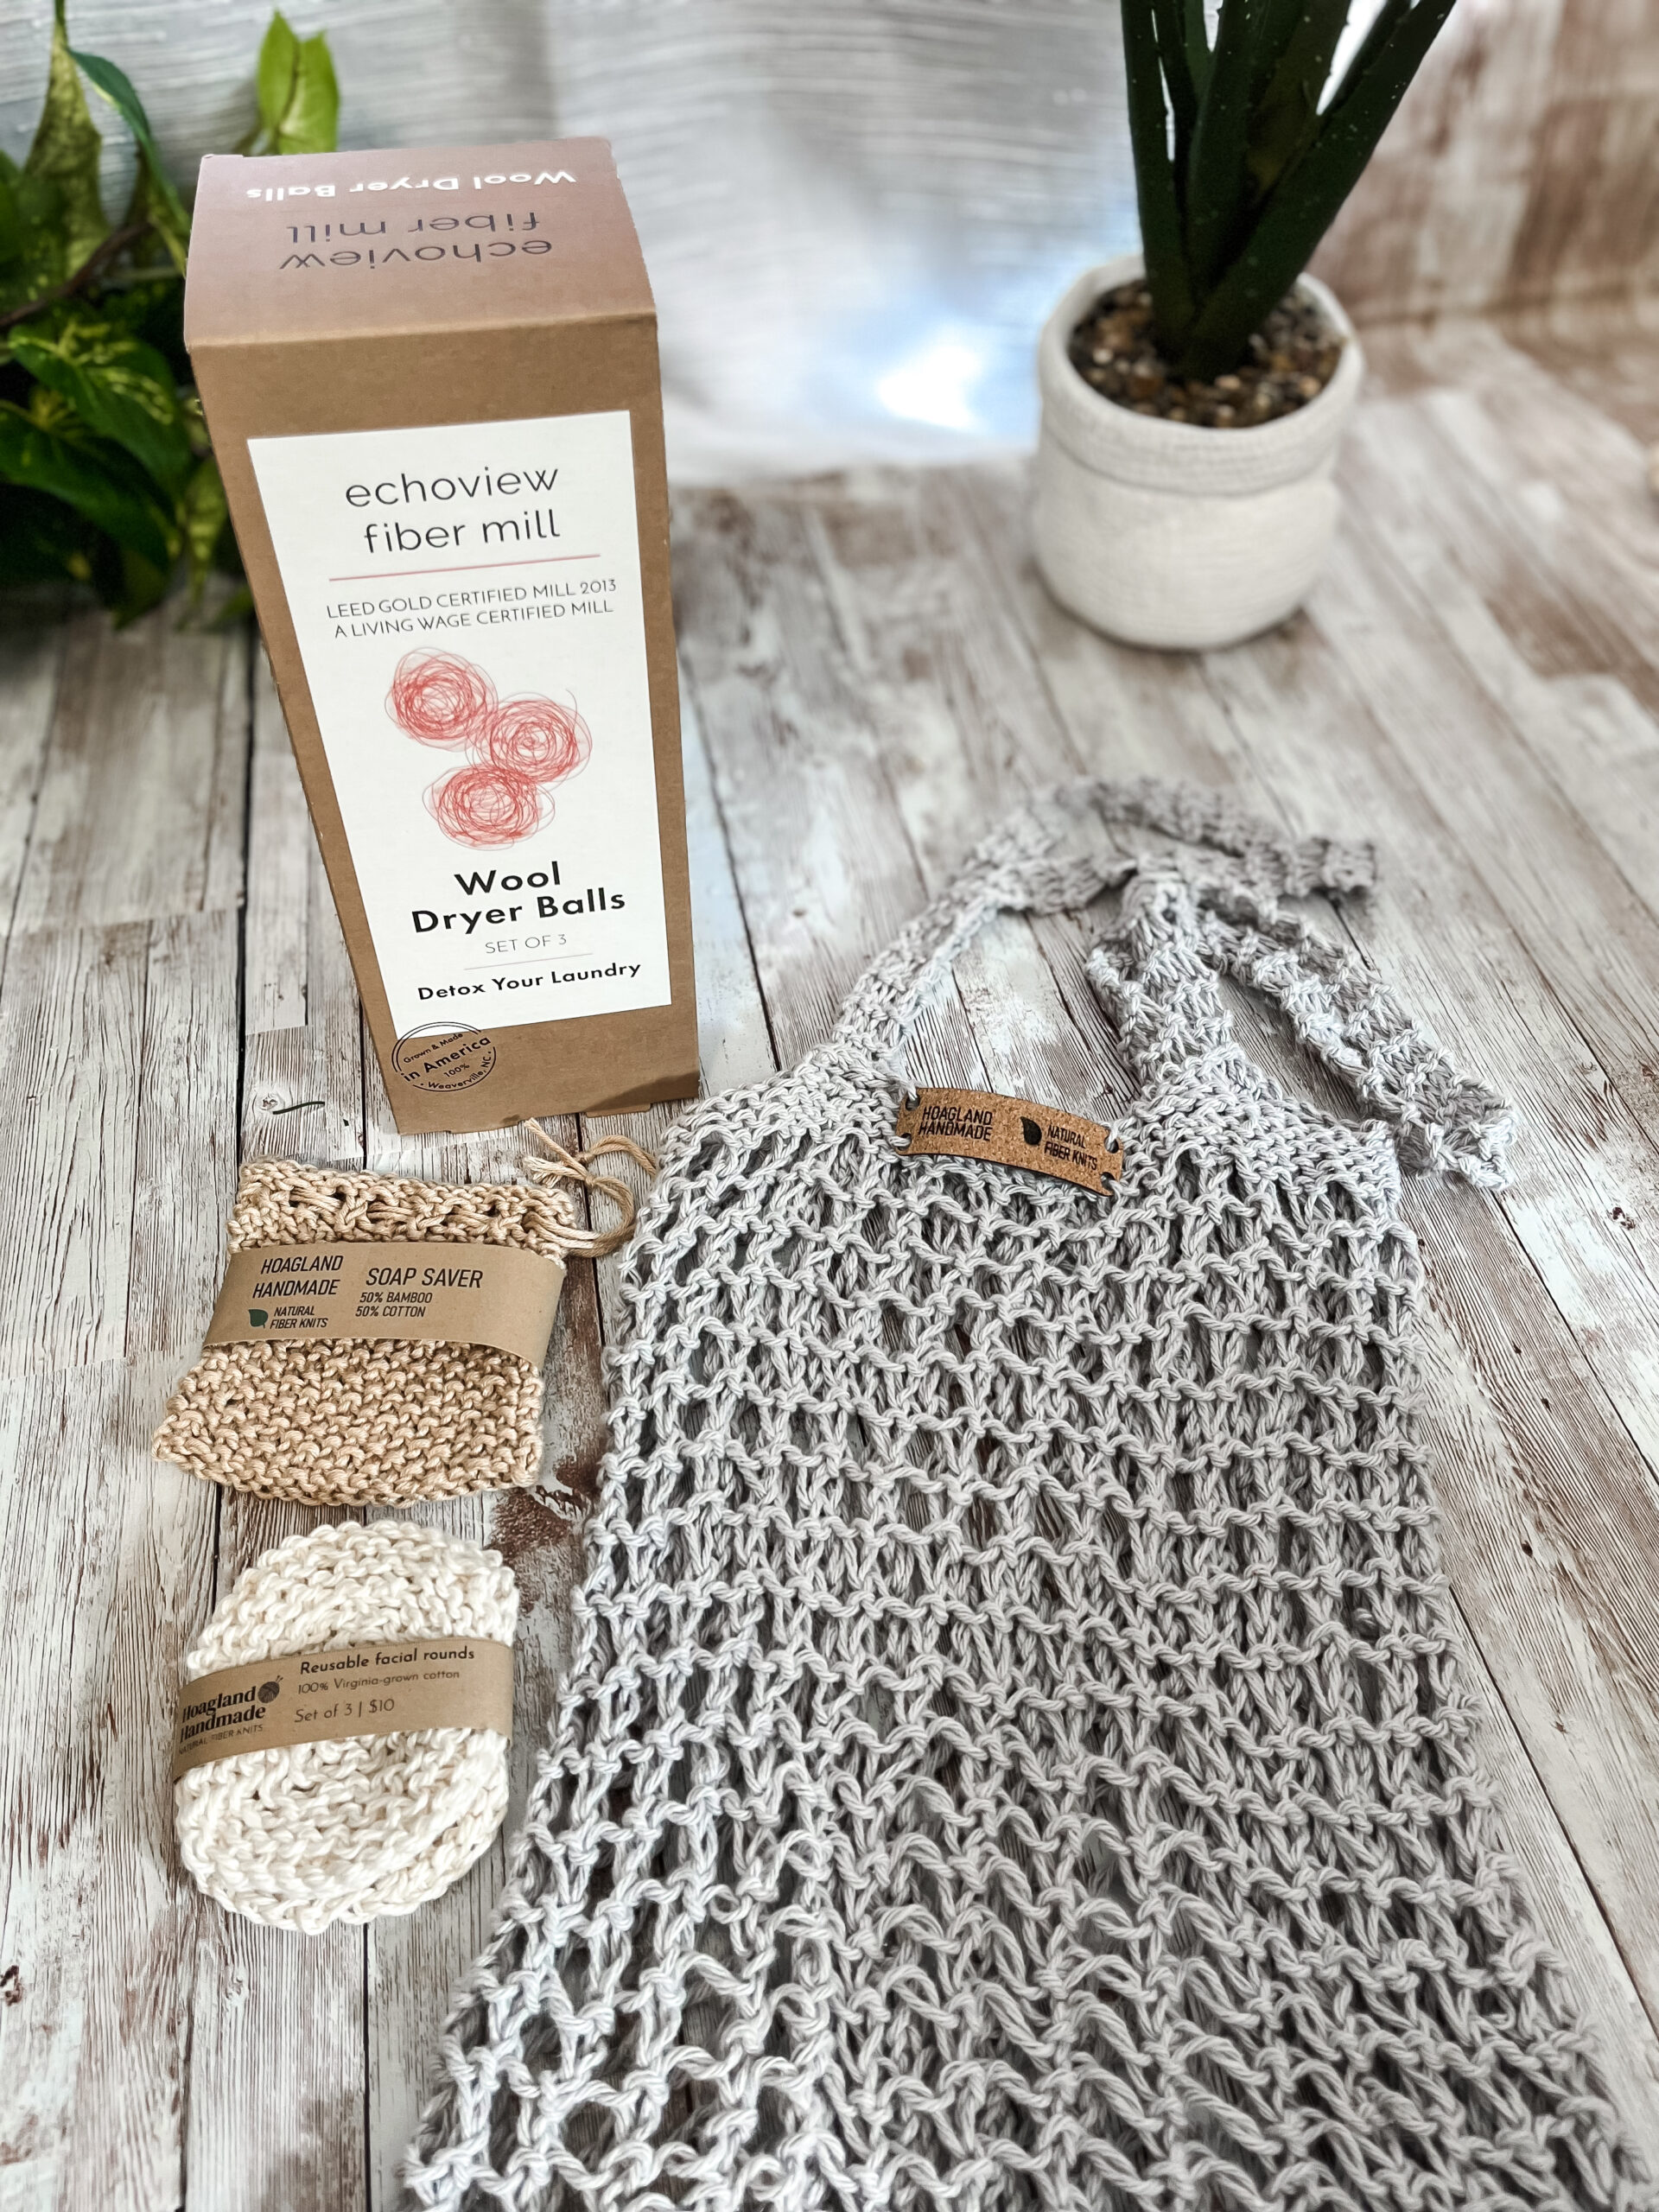 The Zero Waste gift set is pictured showing a box of 3 US Wool dryer balls, a tan bamboo/cotton soap saver pouch wrapped in a kraft paper label from Hoagland Handmade, a set of 3 usable facial rounds knit from Virginia-grown cotton and wrapped in a a kraft paper label from Hoagland Handmade, and a gray recycled cotton knit market tote